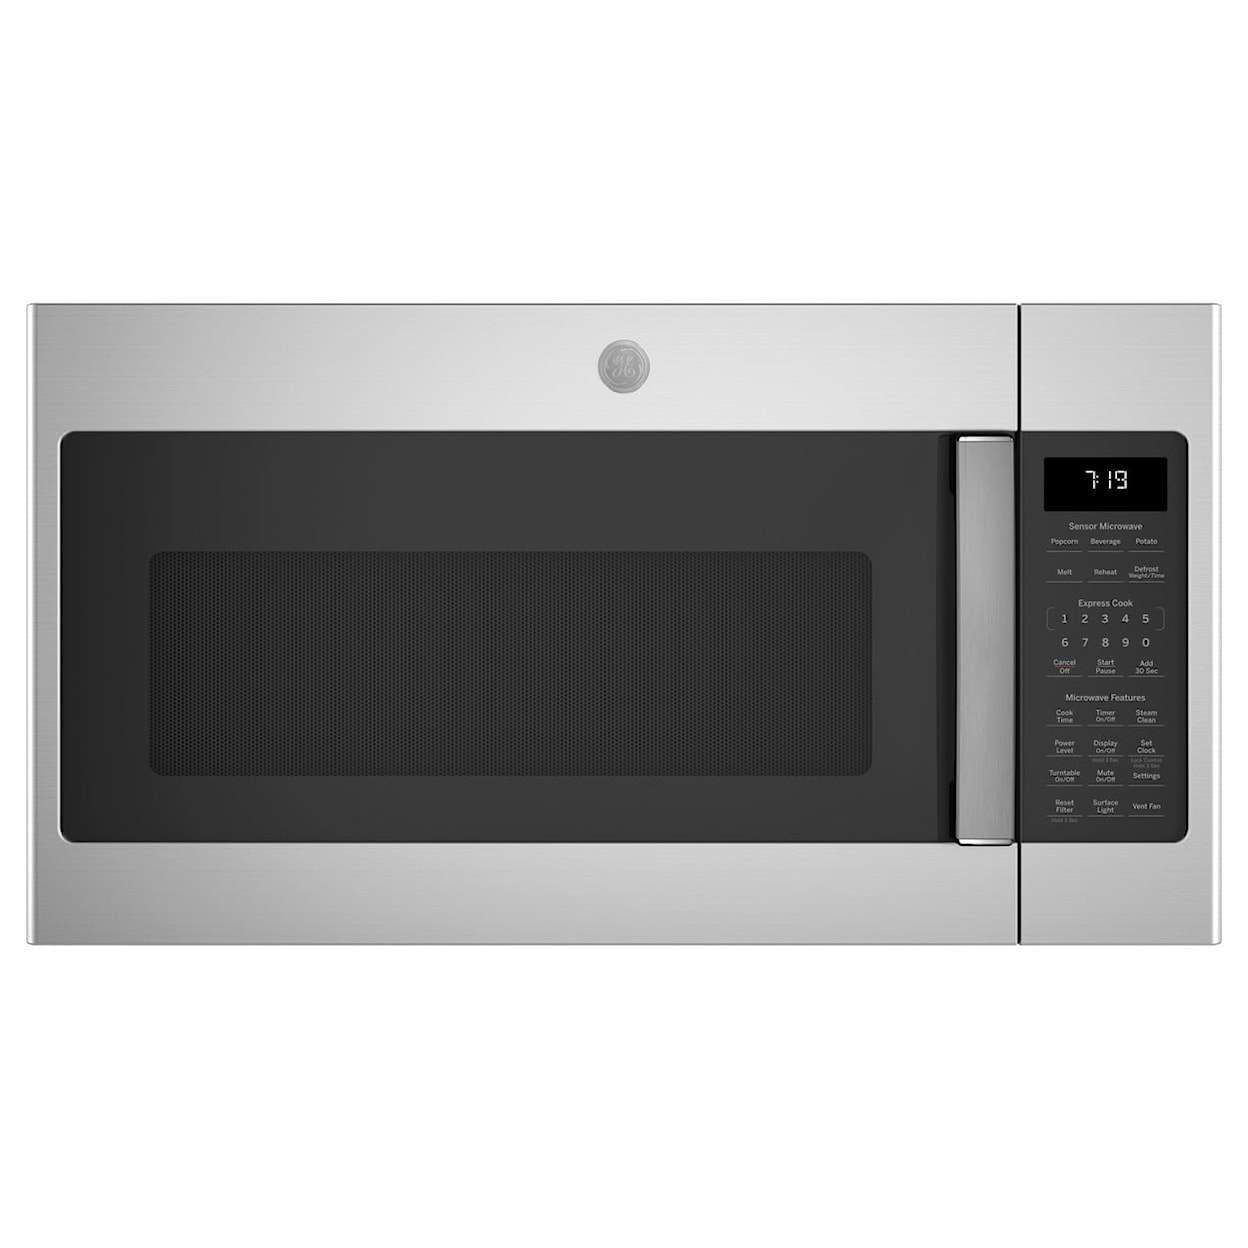 GE Appliances Microwave 1.9 cu. ft. Over the Range Microwave